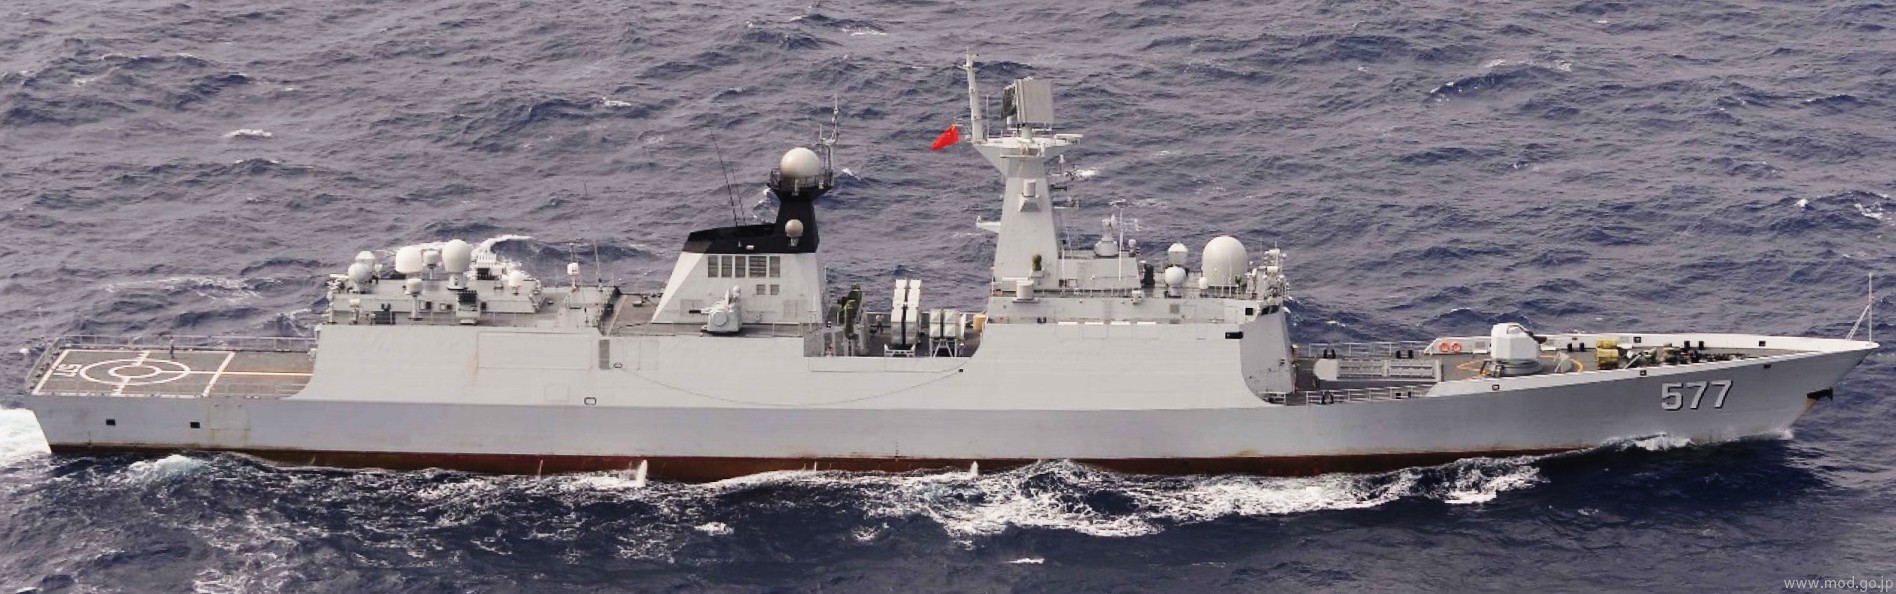 ffg-577 plans huanggang type 054a jiangkai ii class guided missile frigate china people's liberation army navy 03